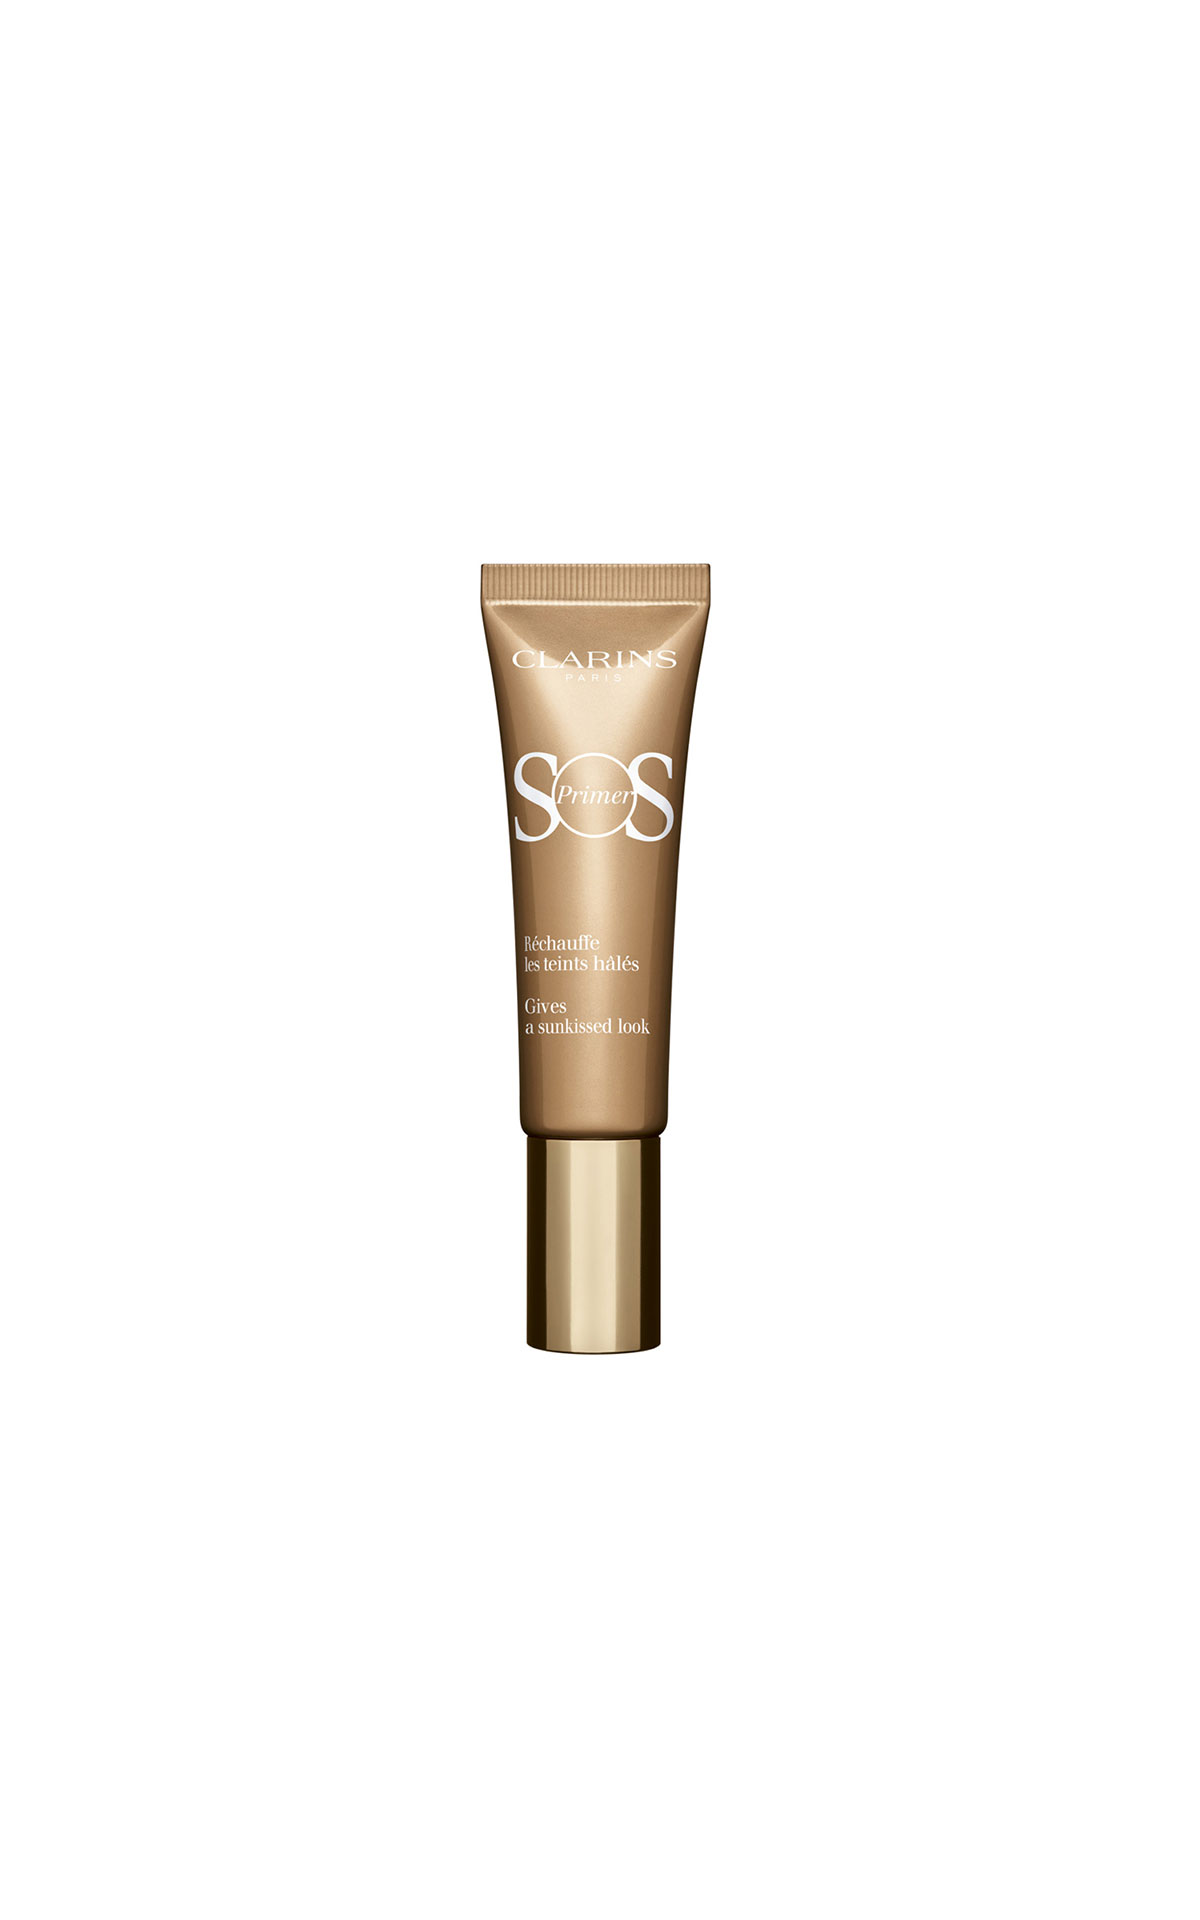 Clarins SOS colour control primer 06 from Bicester Village